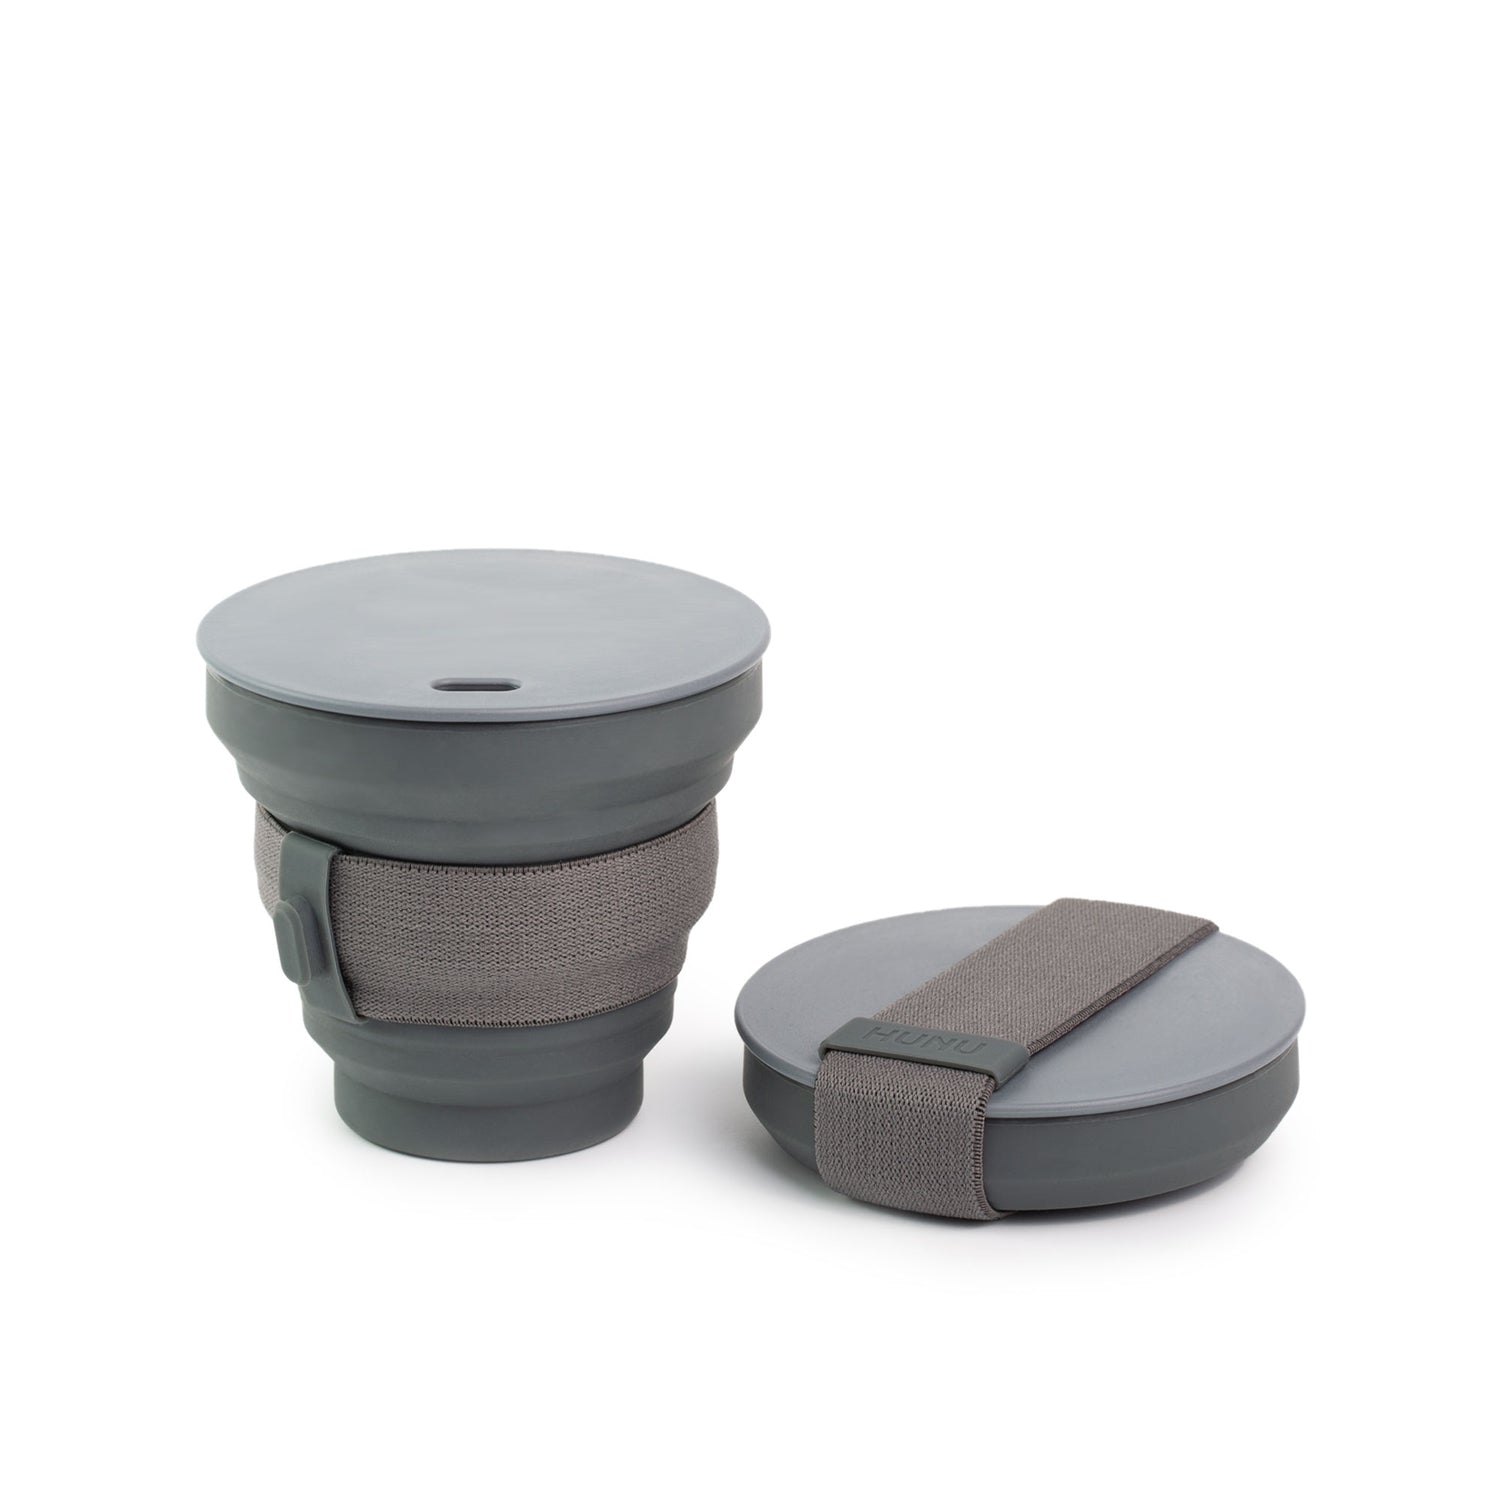 HUNU - The Pocket Sized Cup in Charcoal